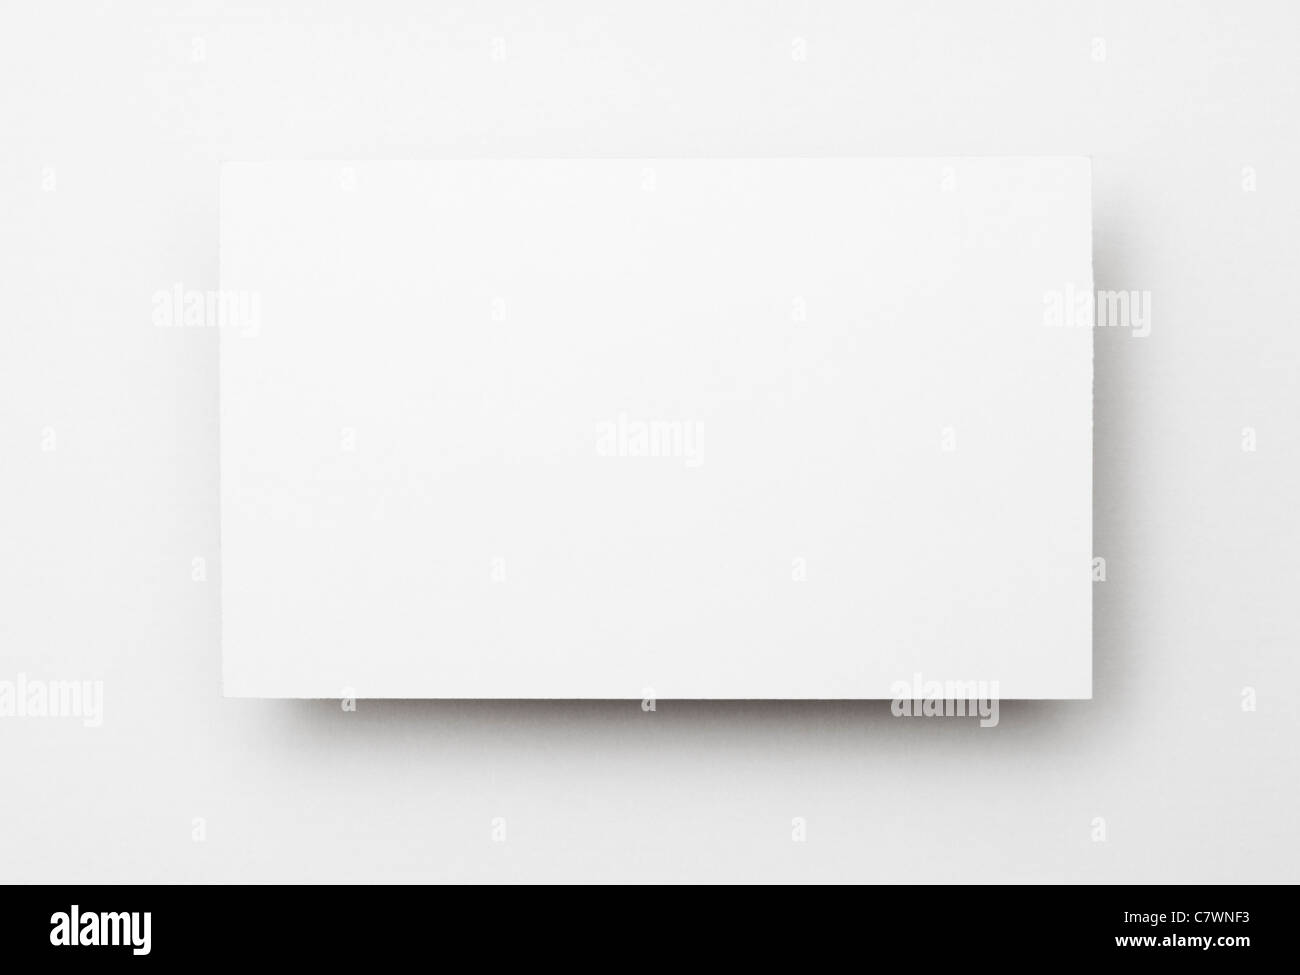 Blank business card. Stock Photo